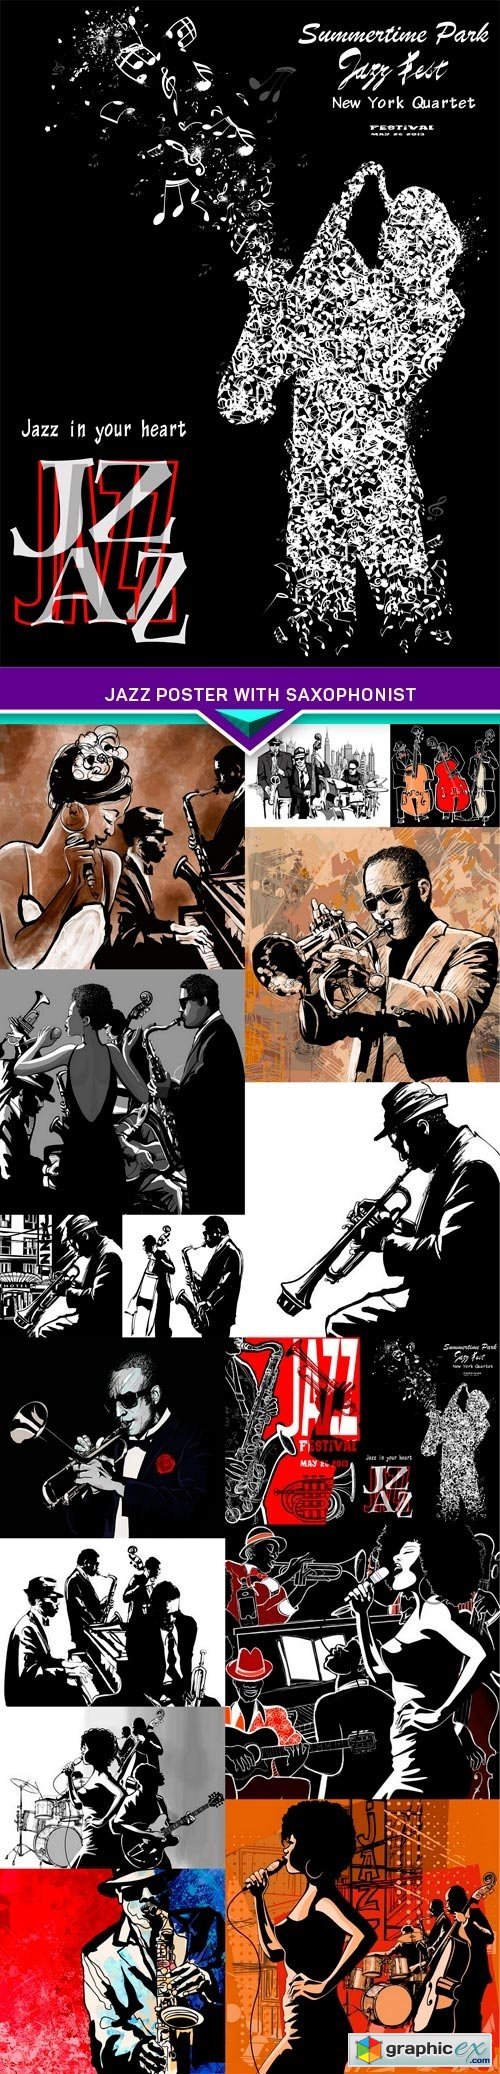 Jazz poster with saxophonist 16x EPS